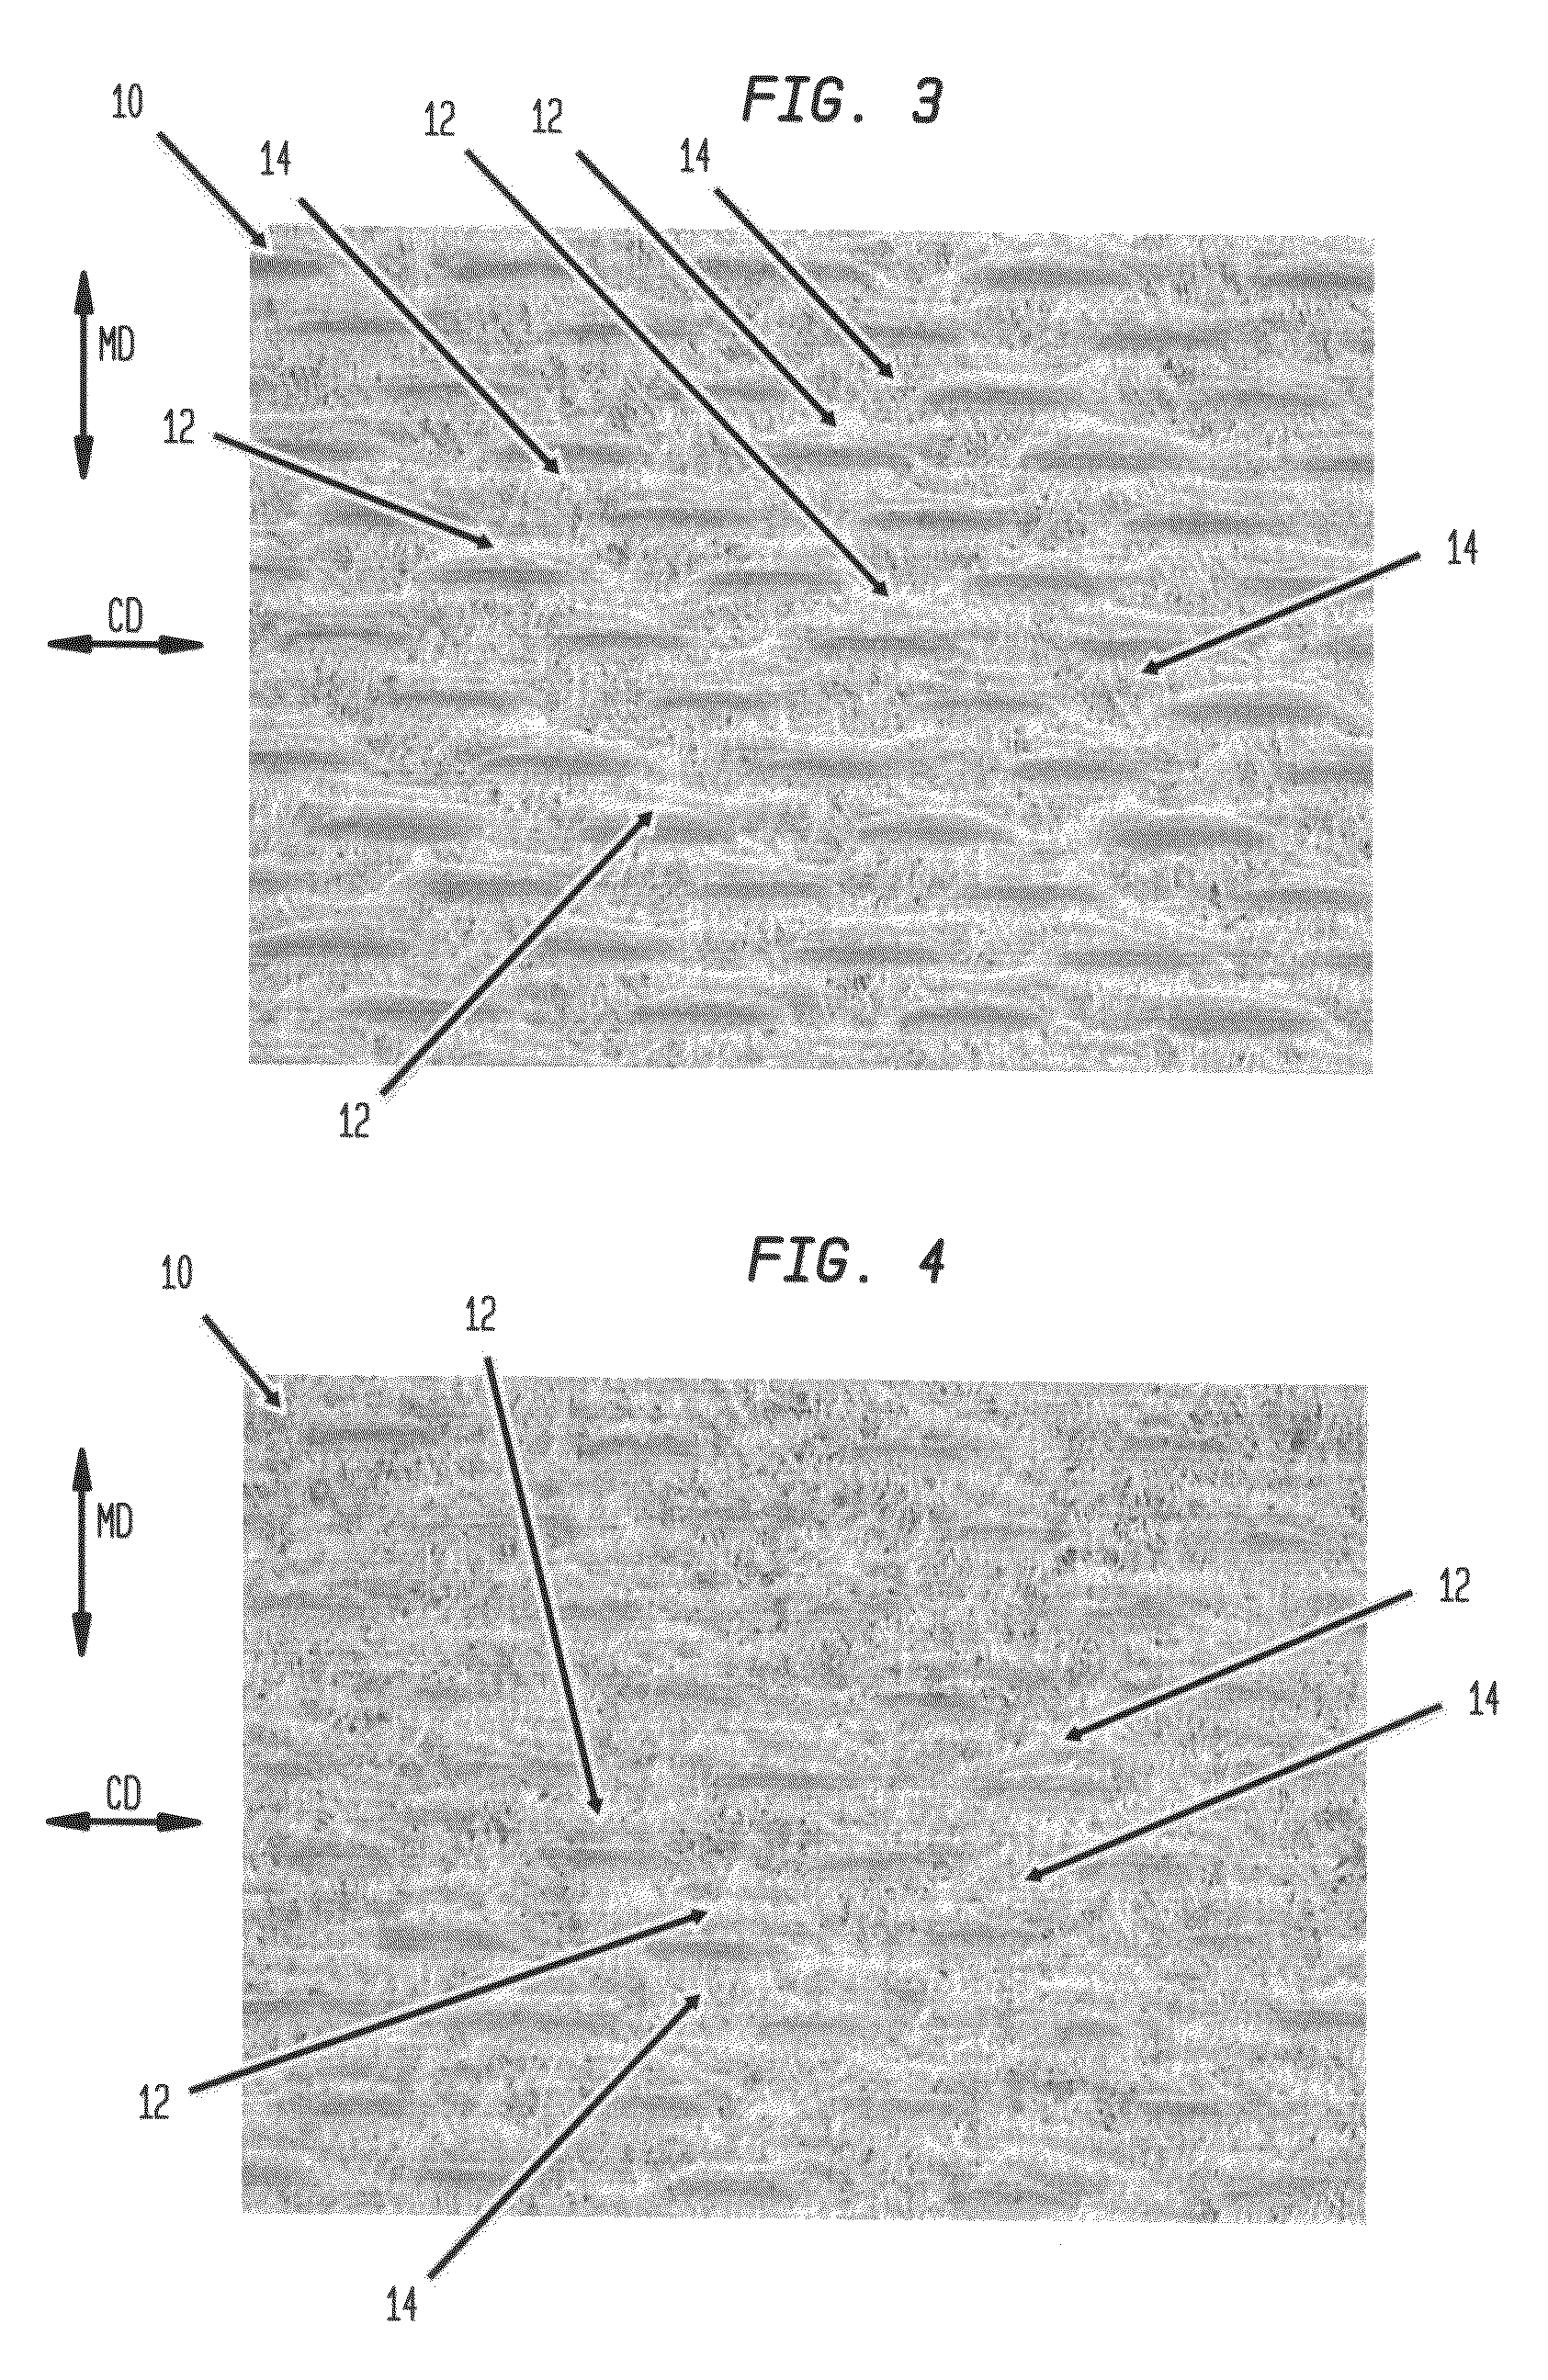 Fabric crepe/draw process for producing absorbent sheet